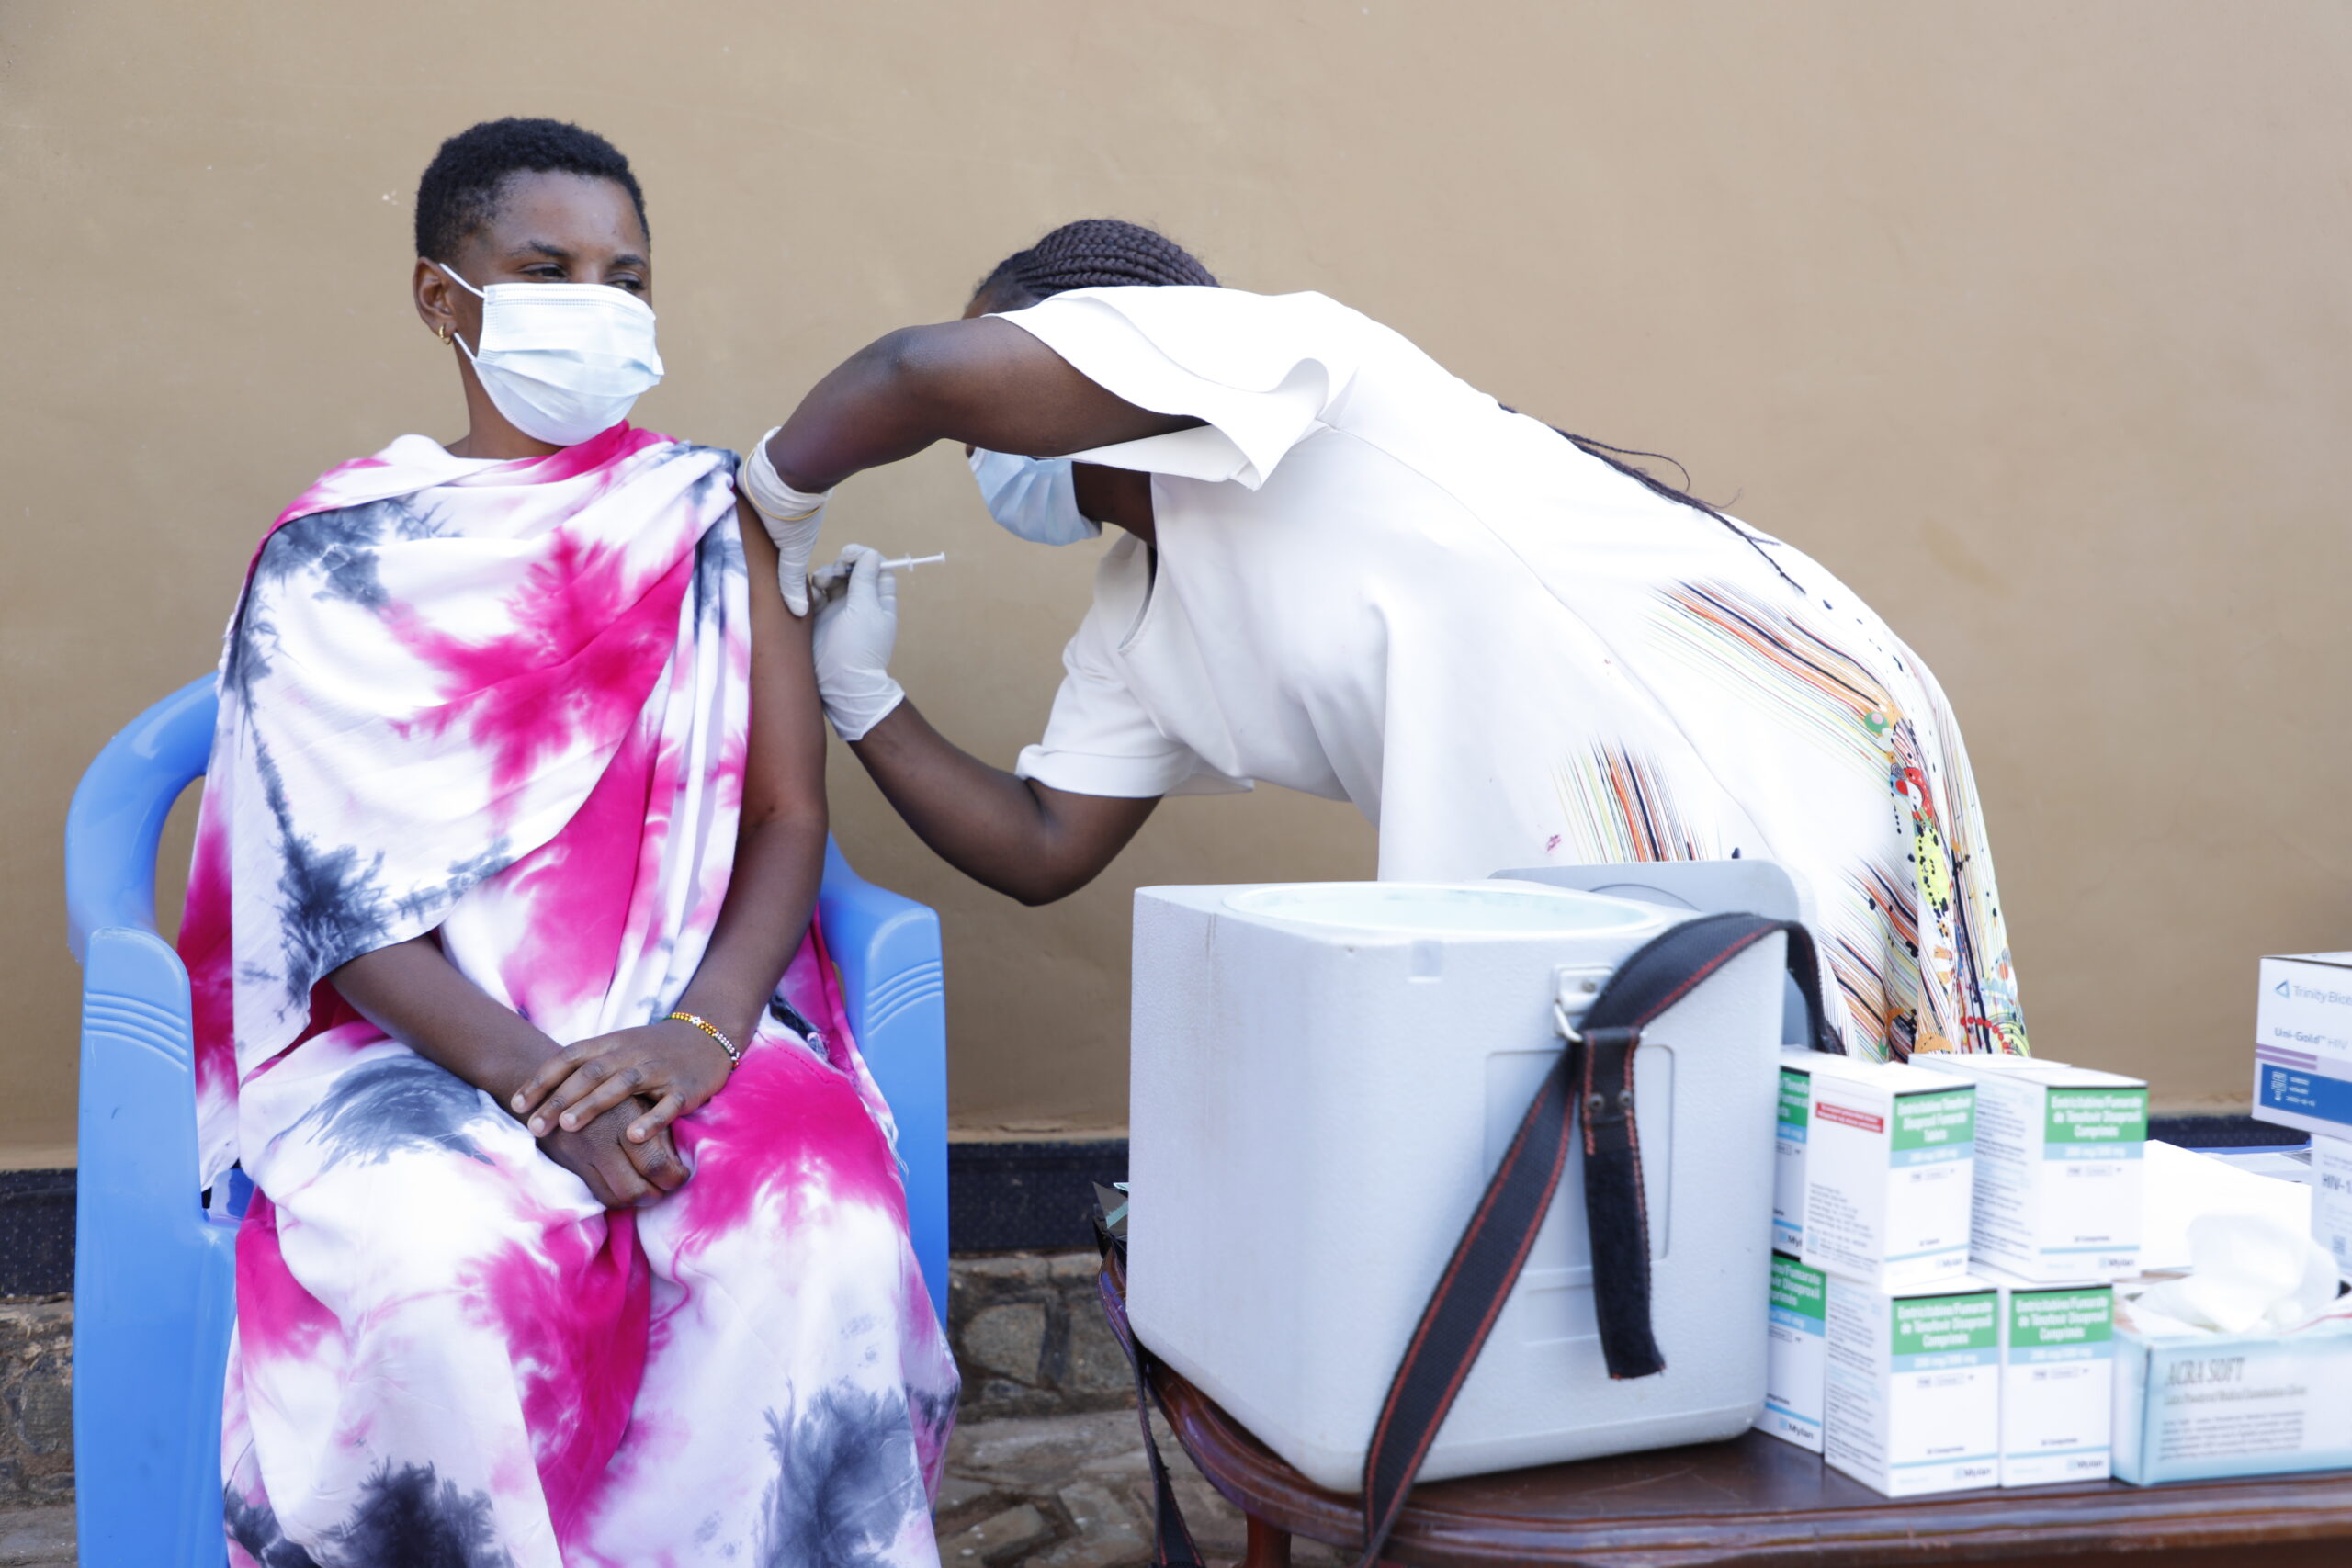 A health care worker trained by the EpiC project administers a COVID-19 vaccine to a female sex worker. Photo by Agness John.